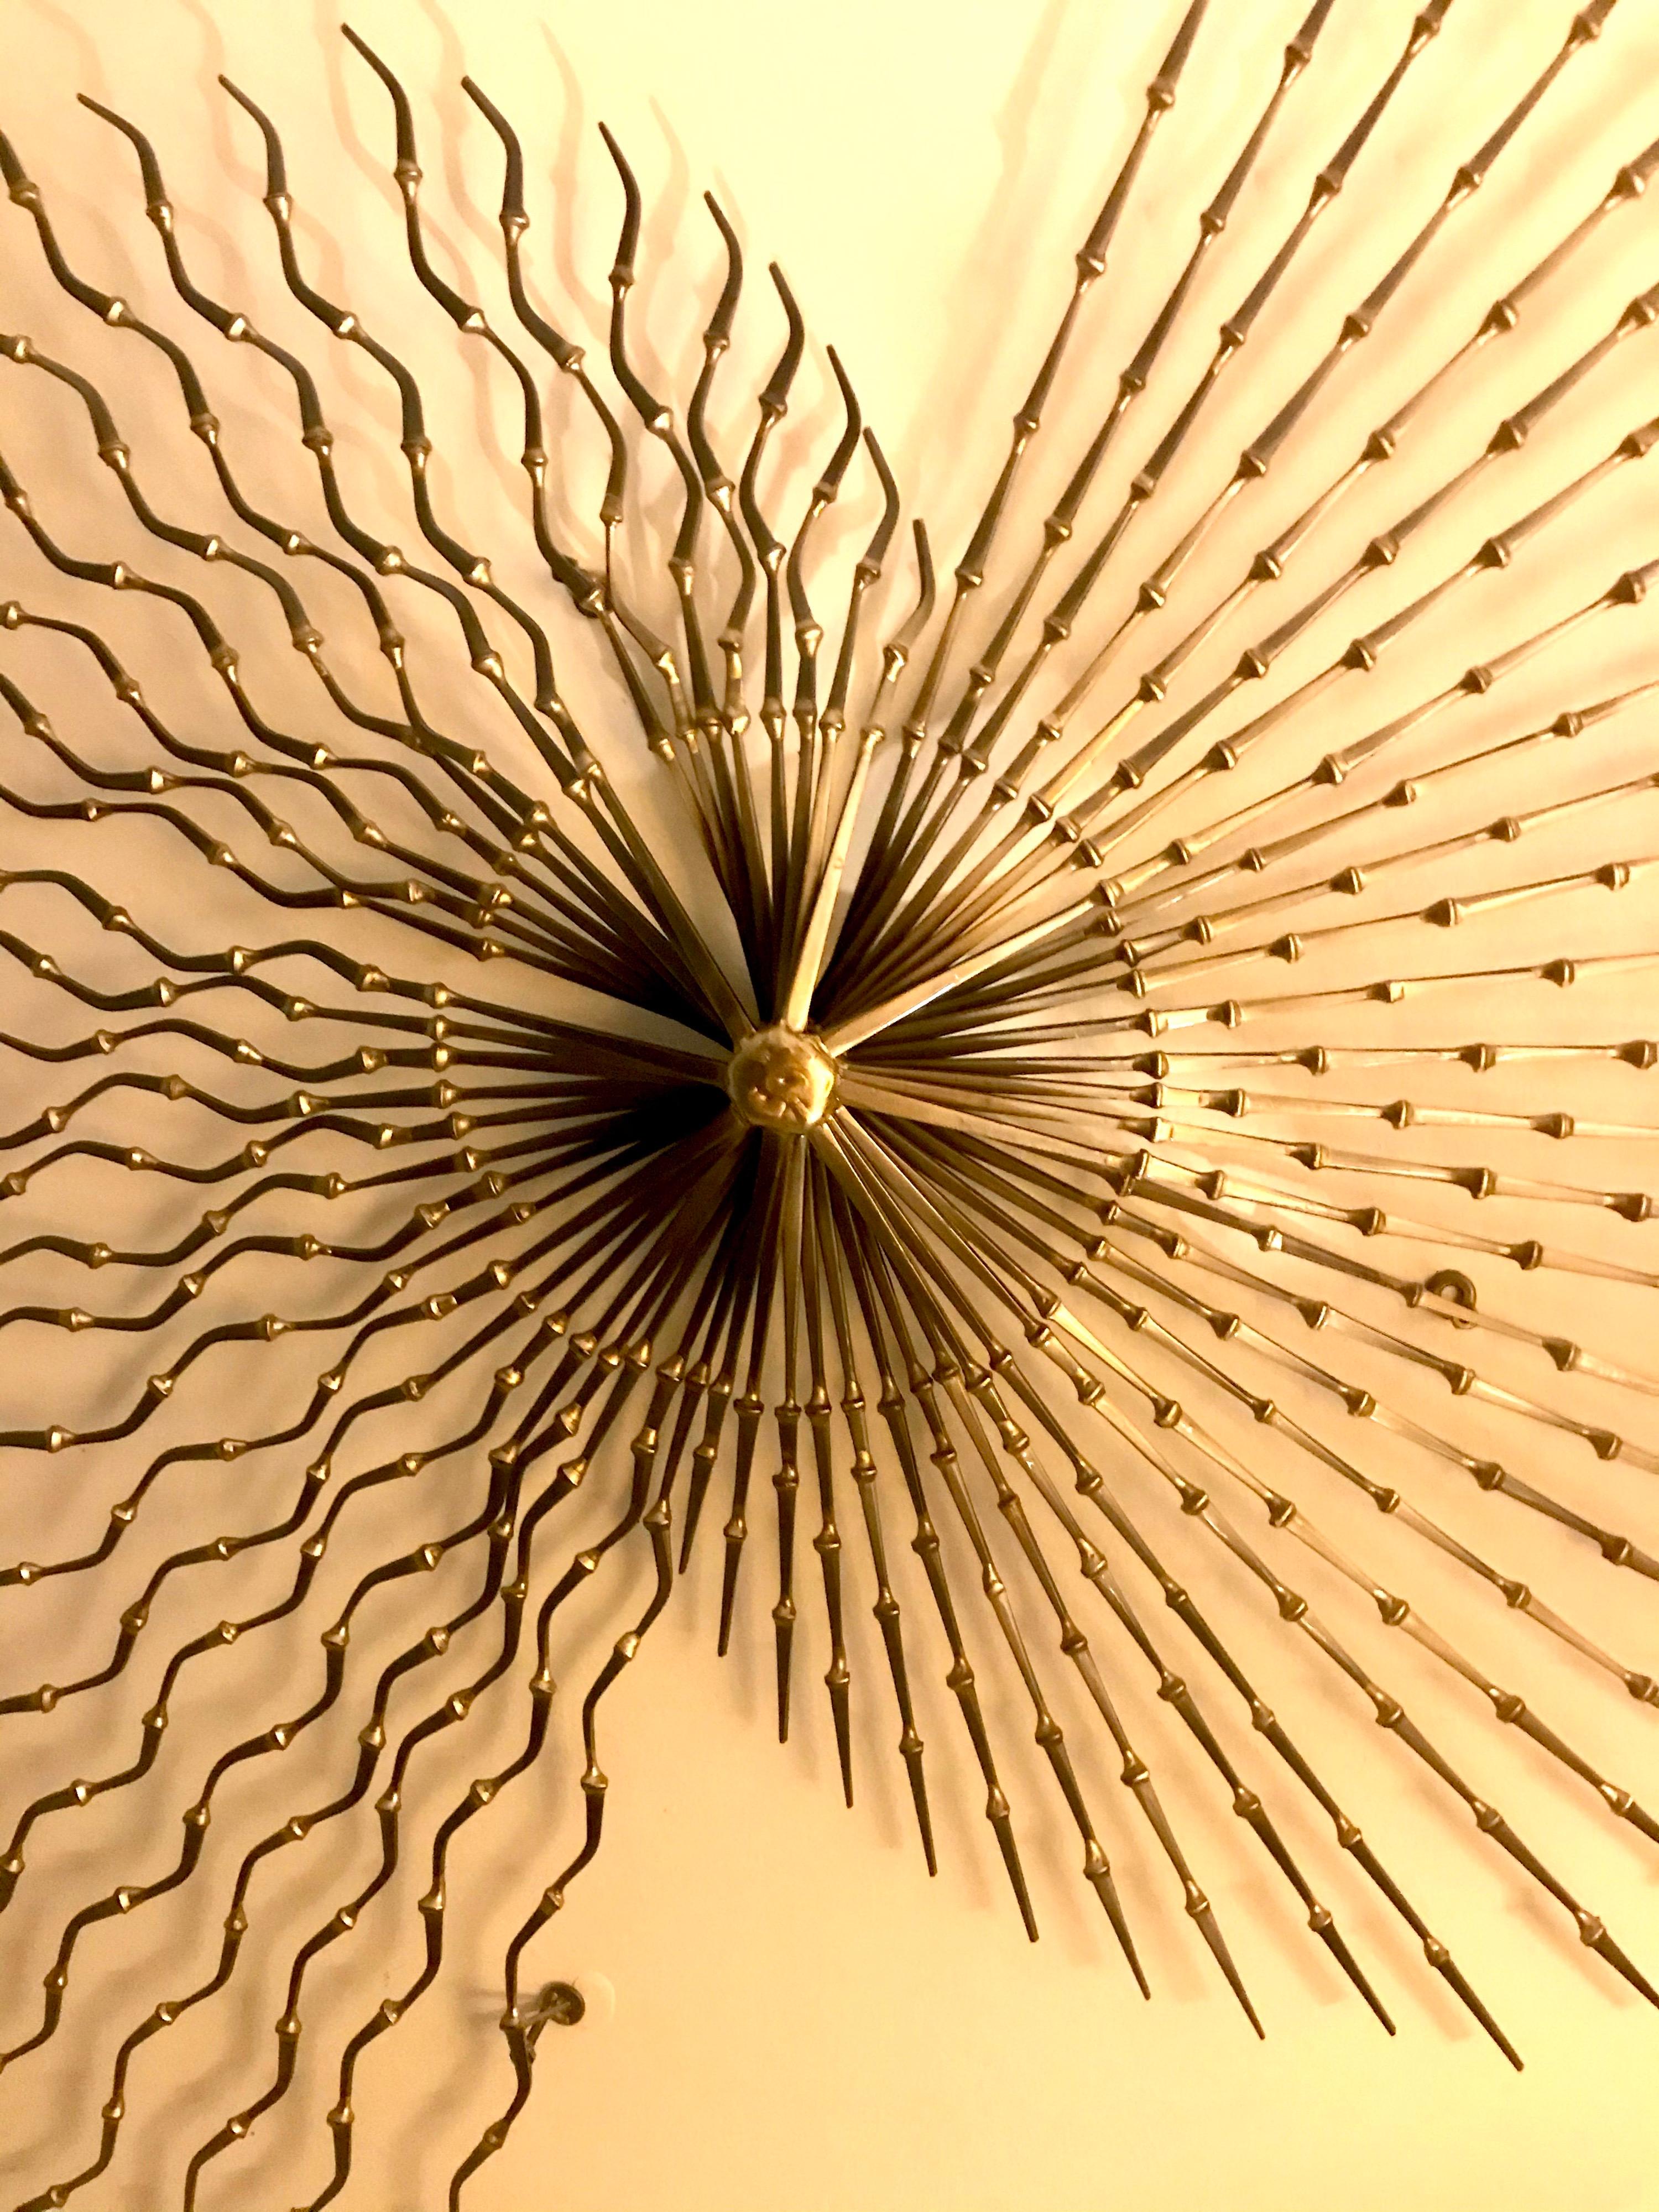 Mid Century Mixed Metal Pin Wheel Sunburst Wall Sculpture In Good Condition For Sale In Miami, FL